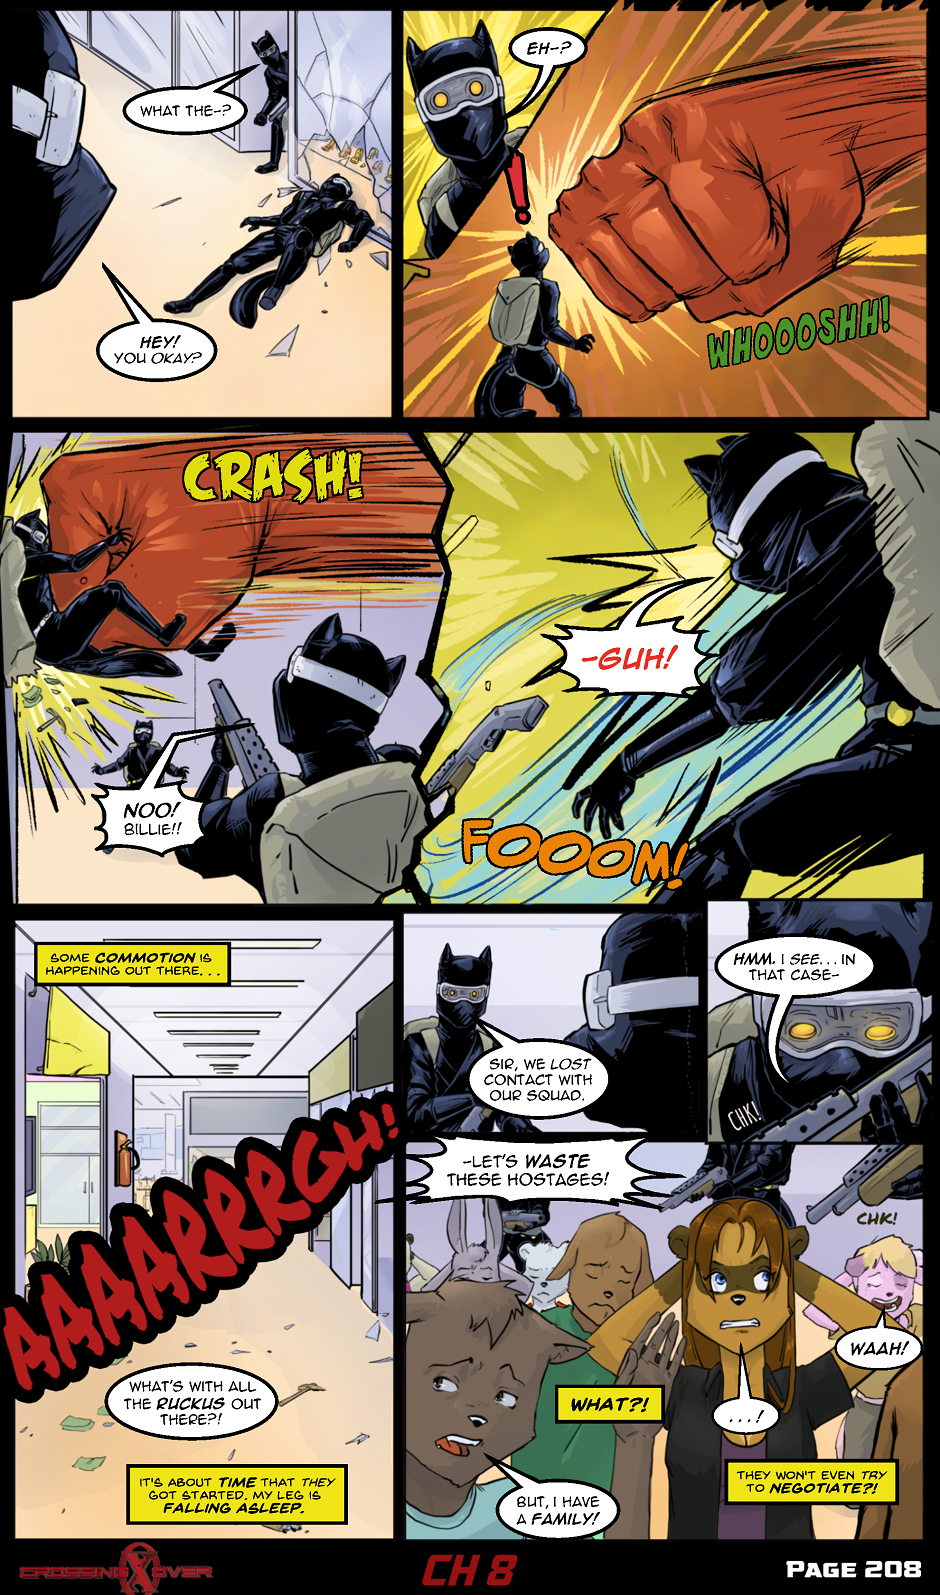 Page 208 (Ch 8)